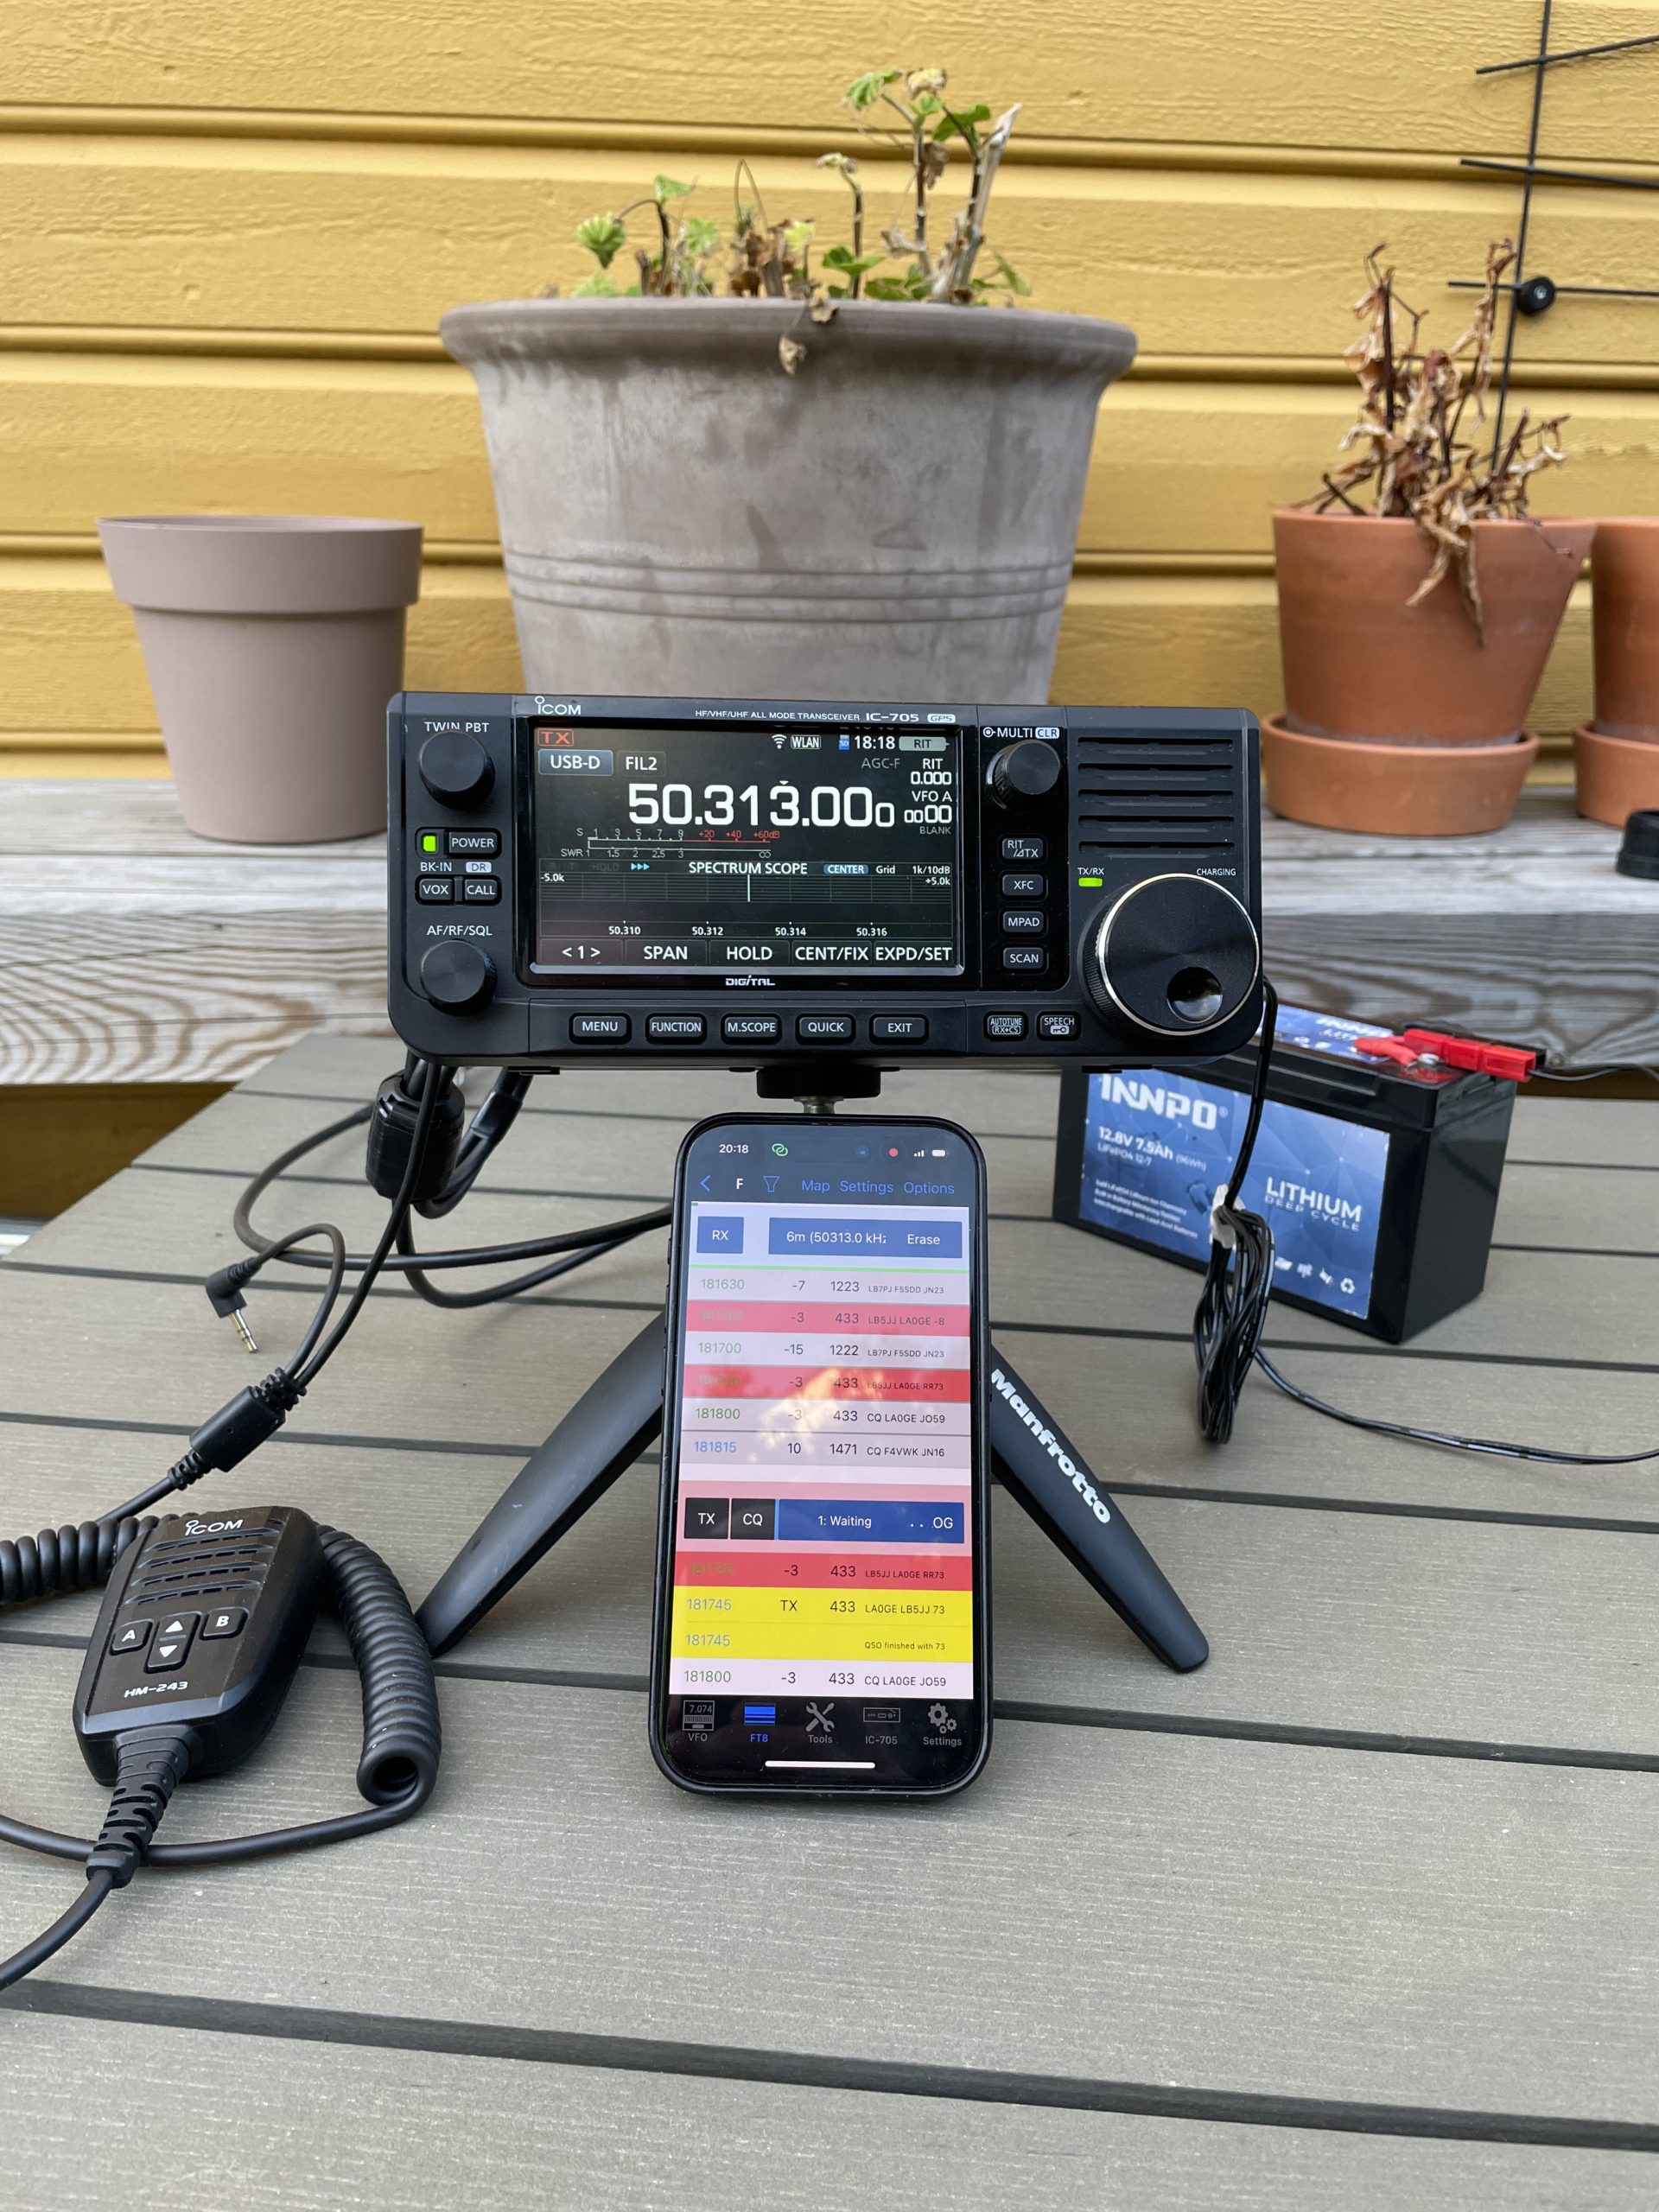 FT8 on the iPhone with NO wires!